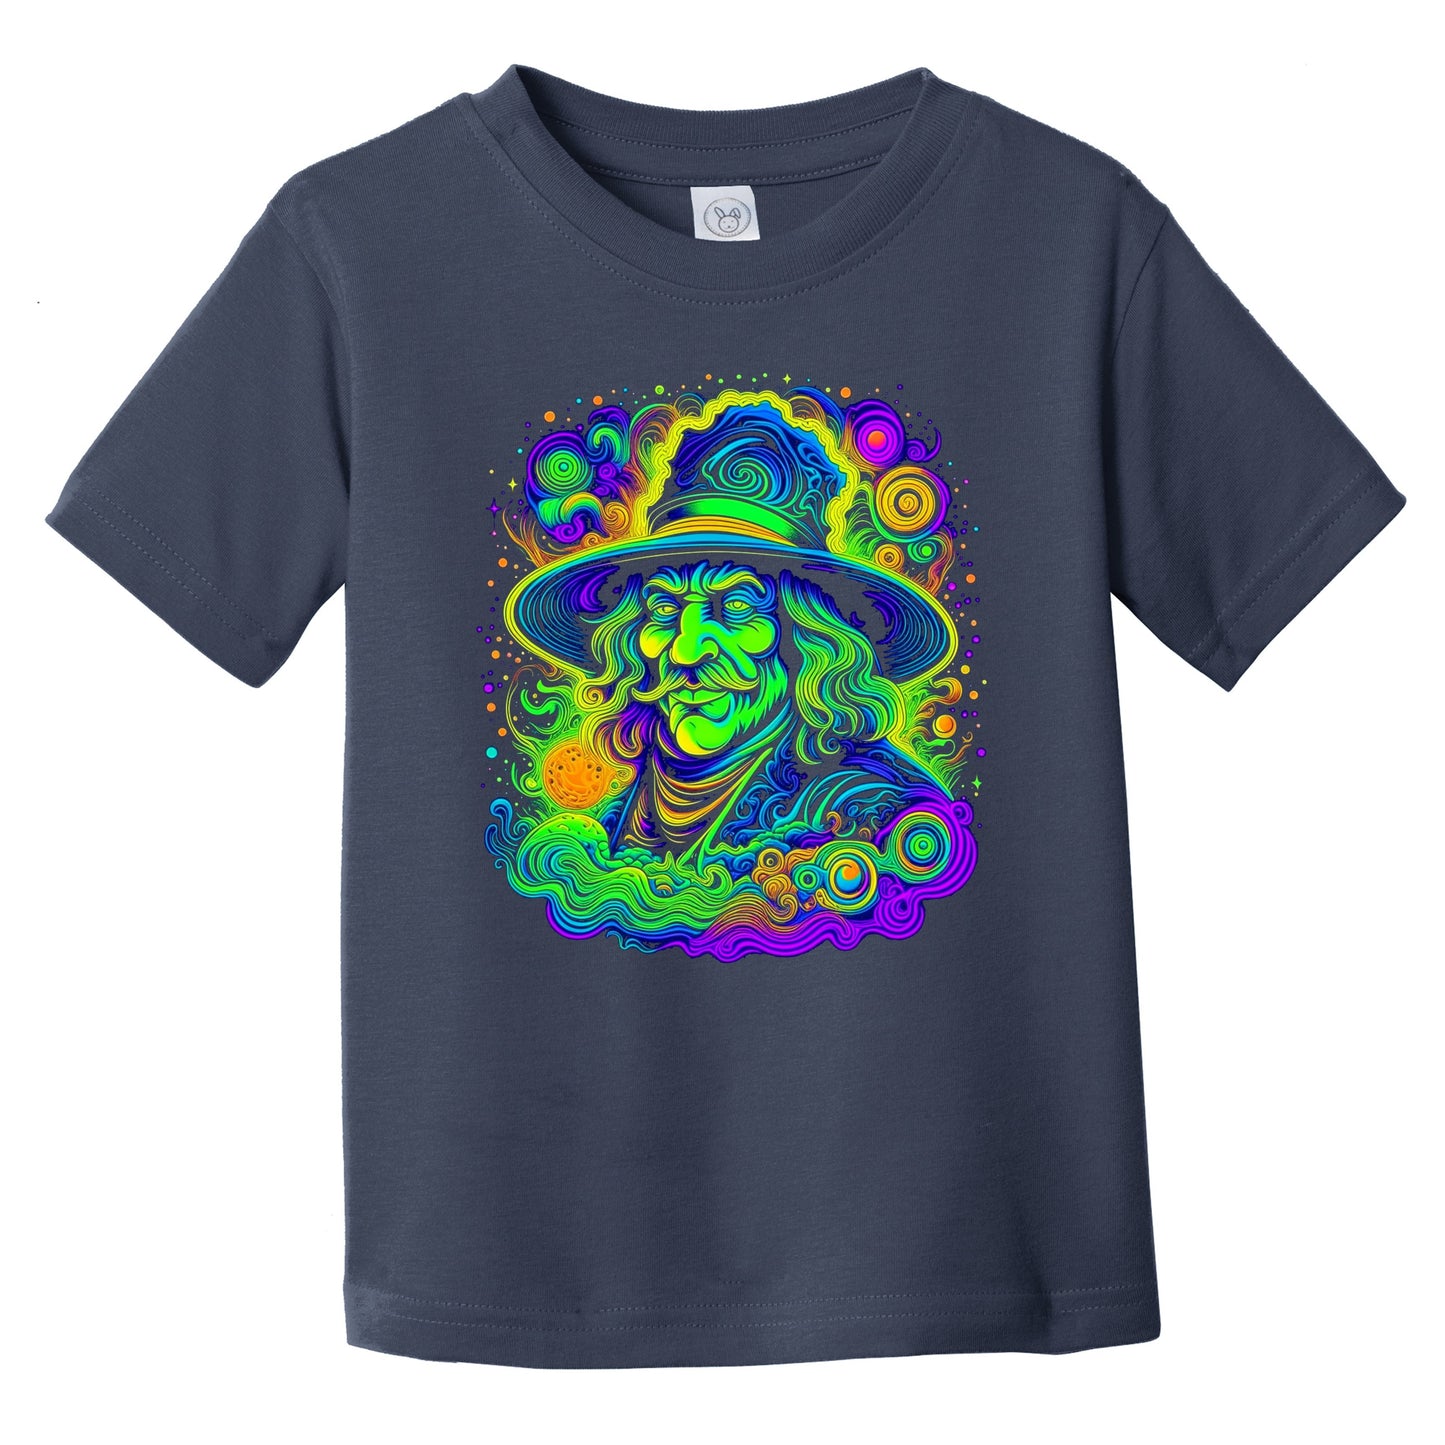 Colorful Bright Leprechaun Vibrant Psychedelic Wizard Art Infant Toddler T-Shirt